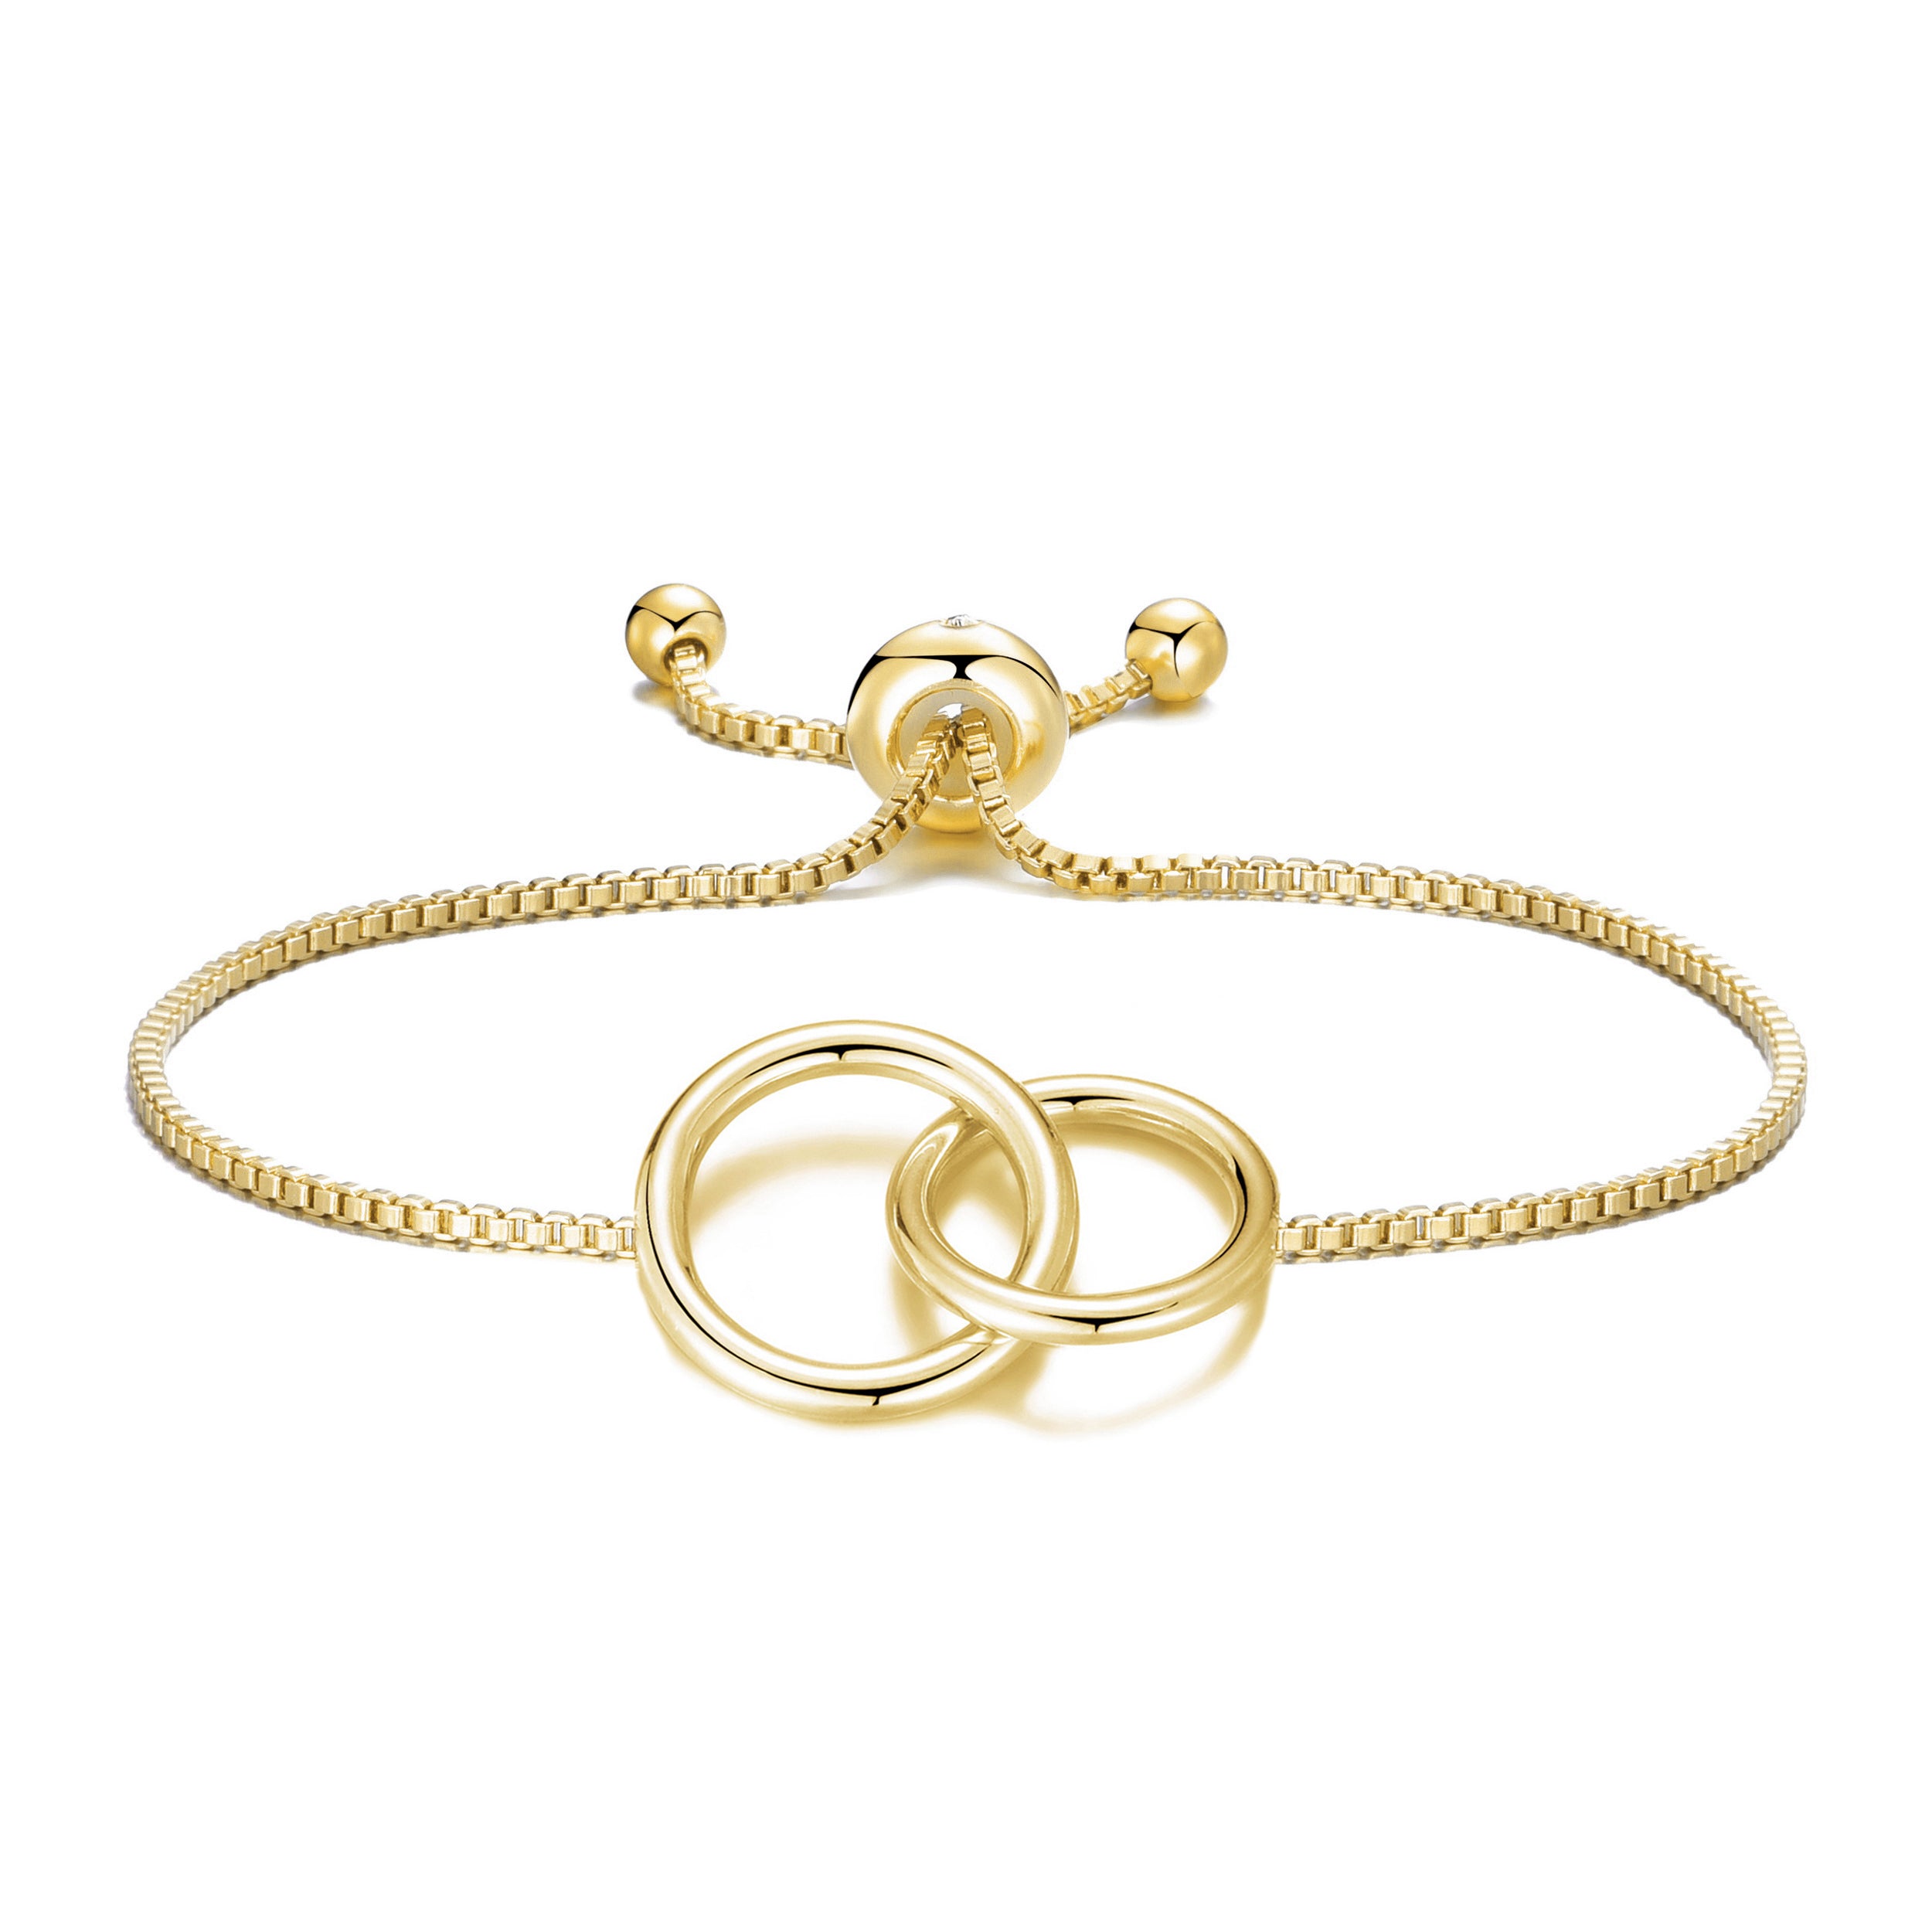 Gold Plated Link Friendship Bracelet Created with Zircondia® Crystals by Philip Jones Jewellery